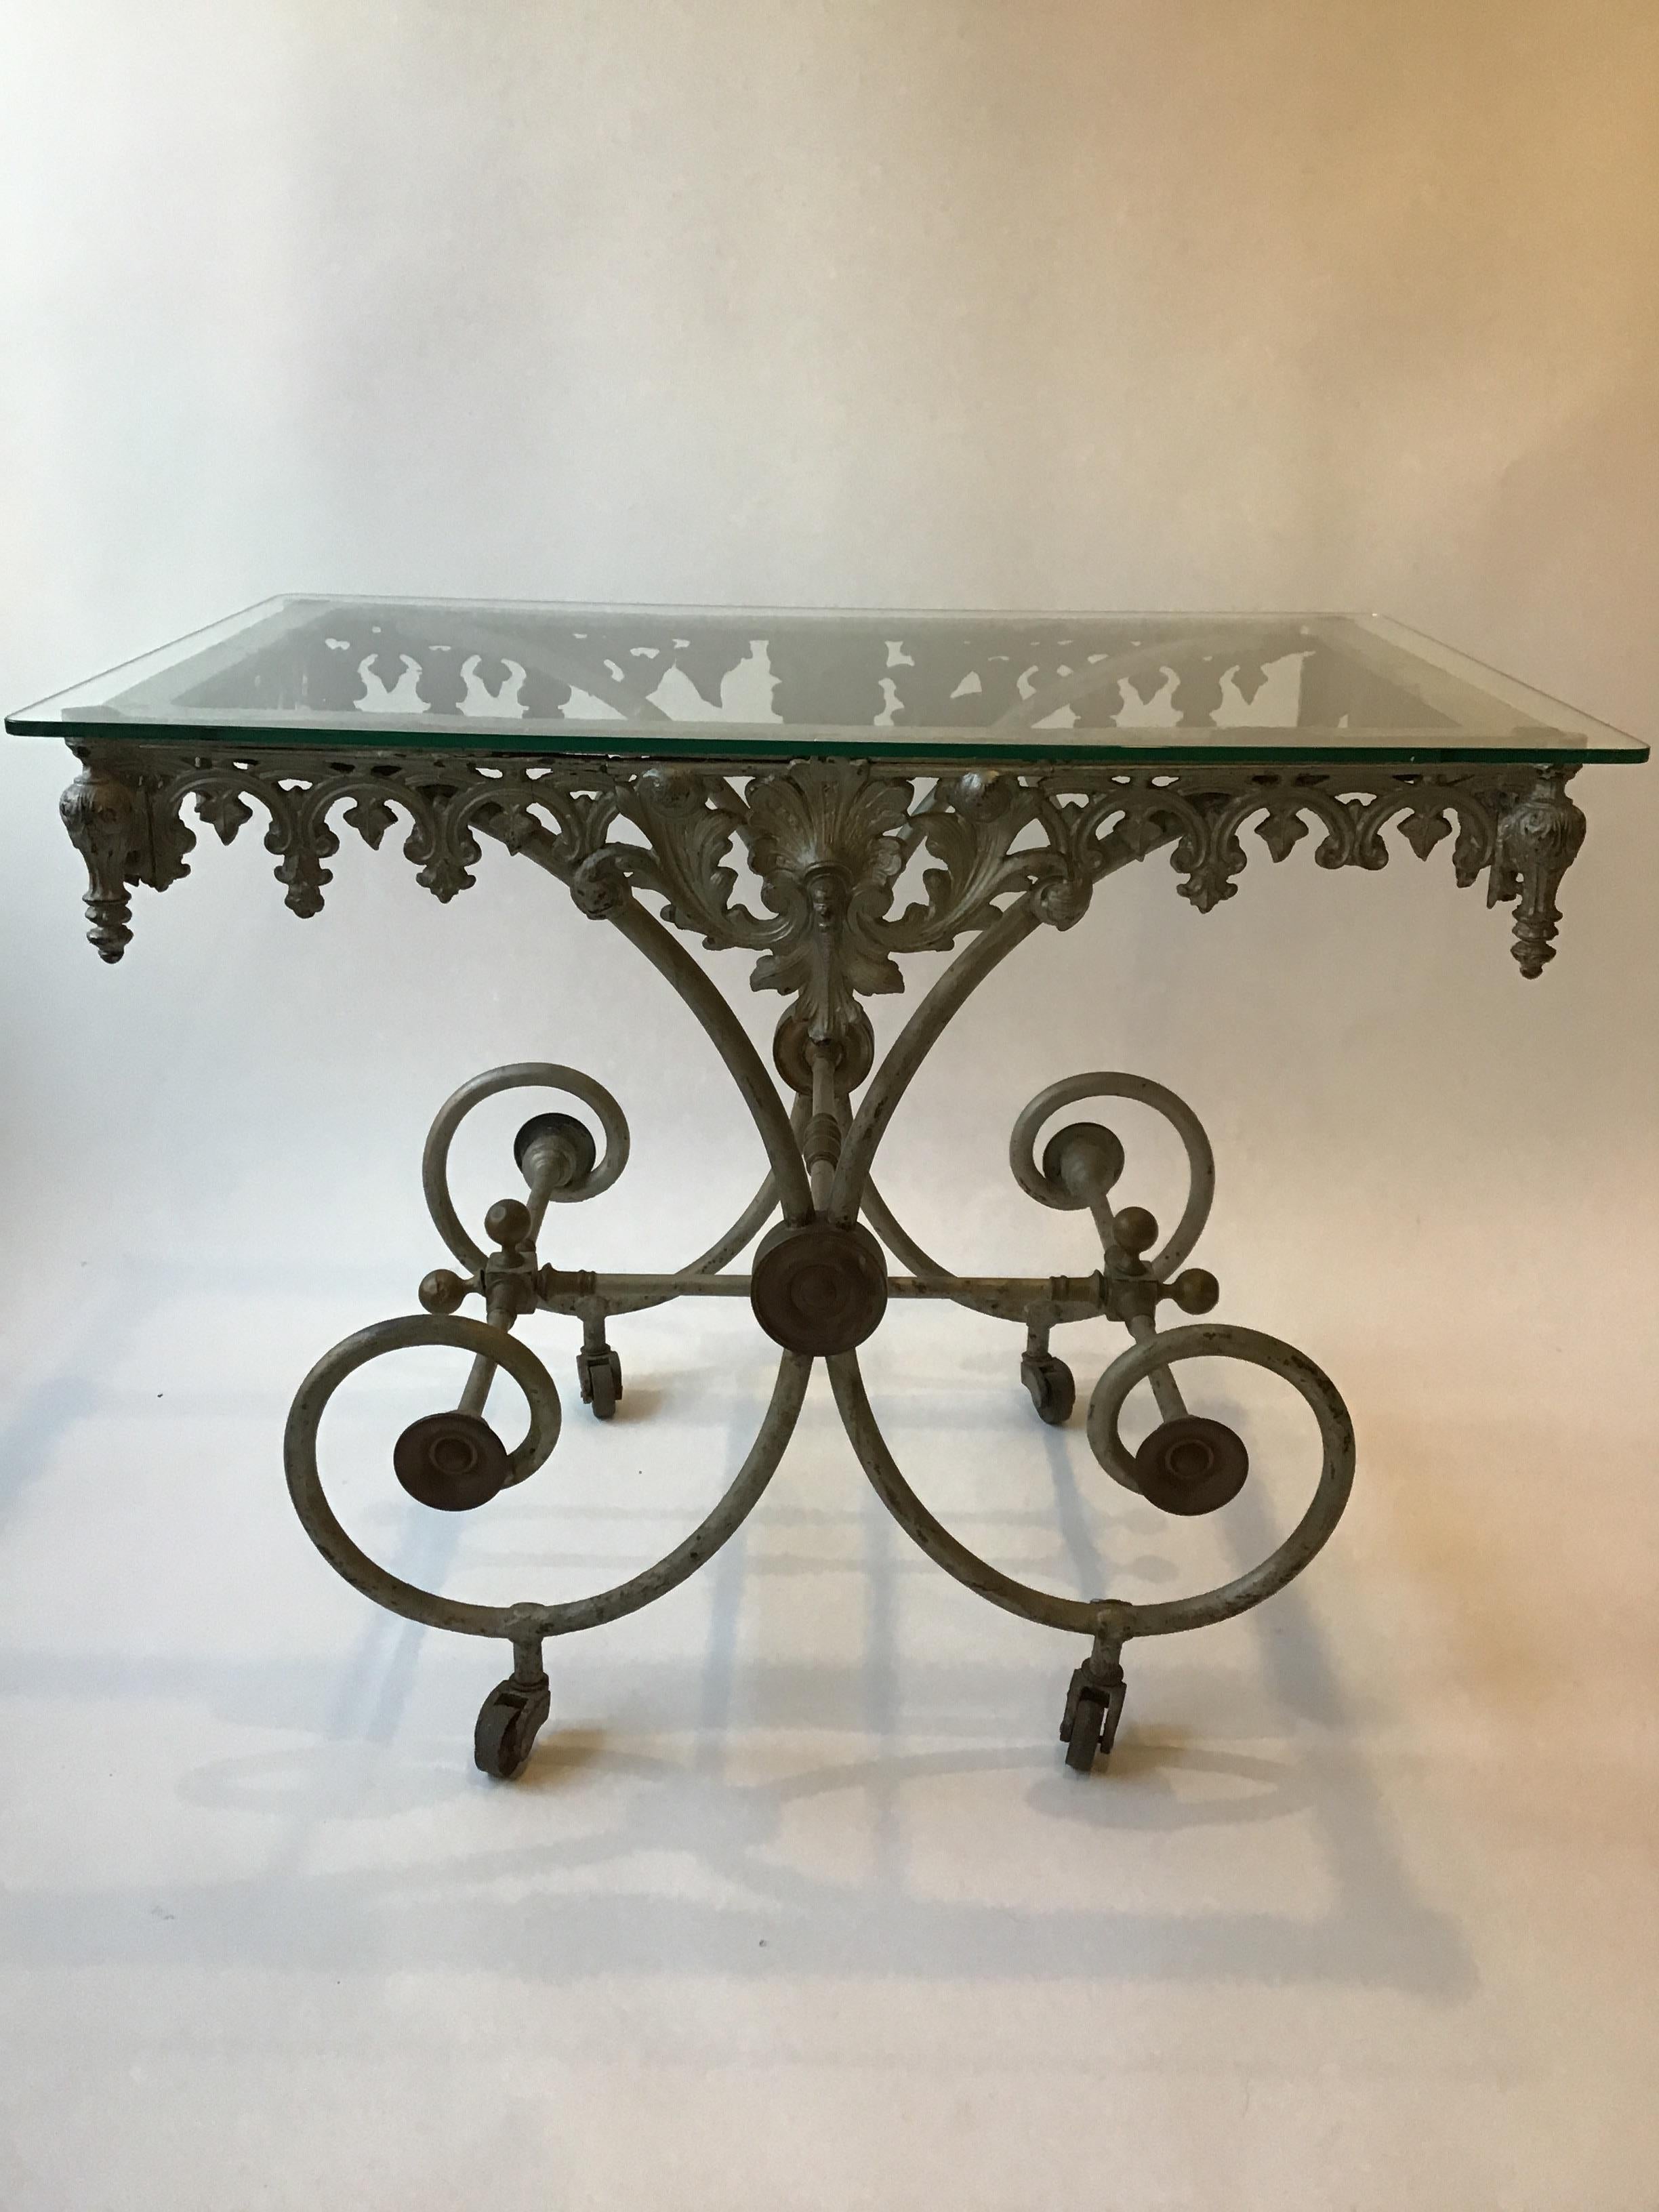 1880s French bakers table. Painted silver, iron with brass accents.